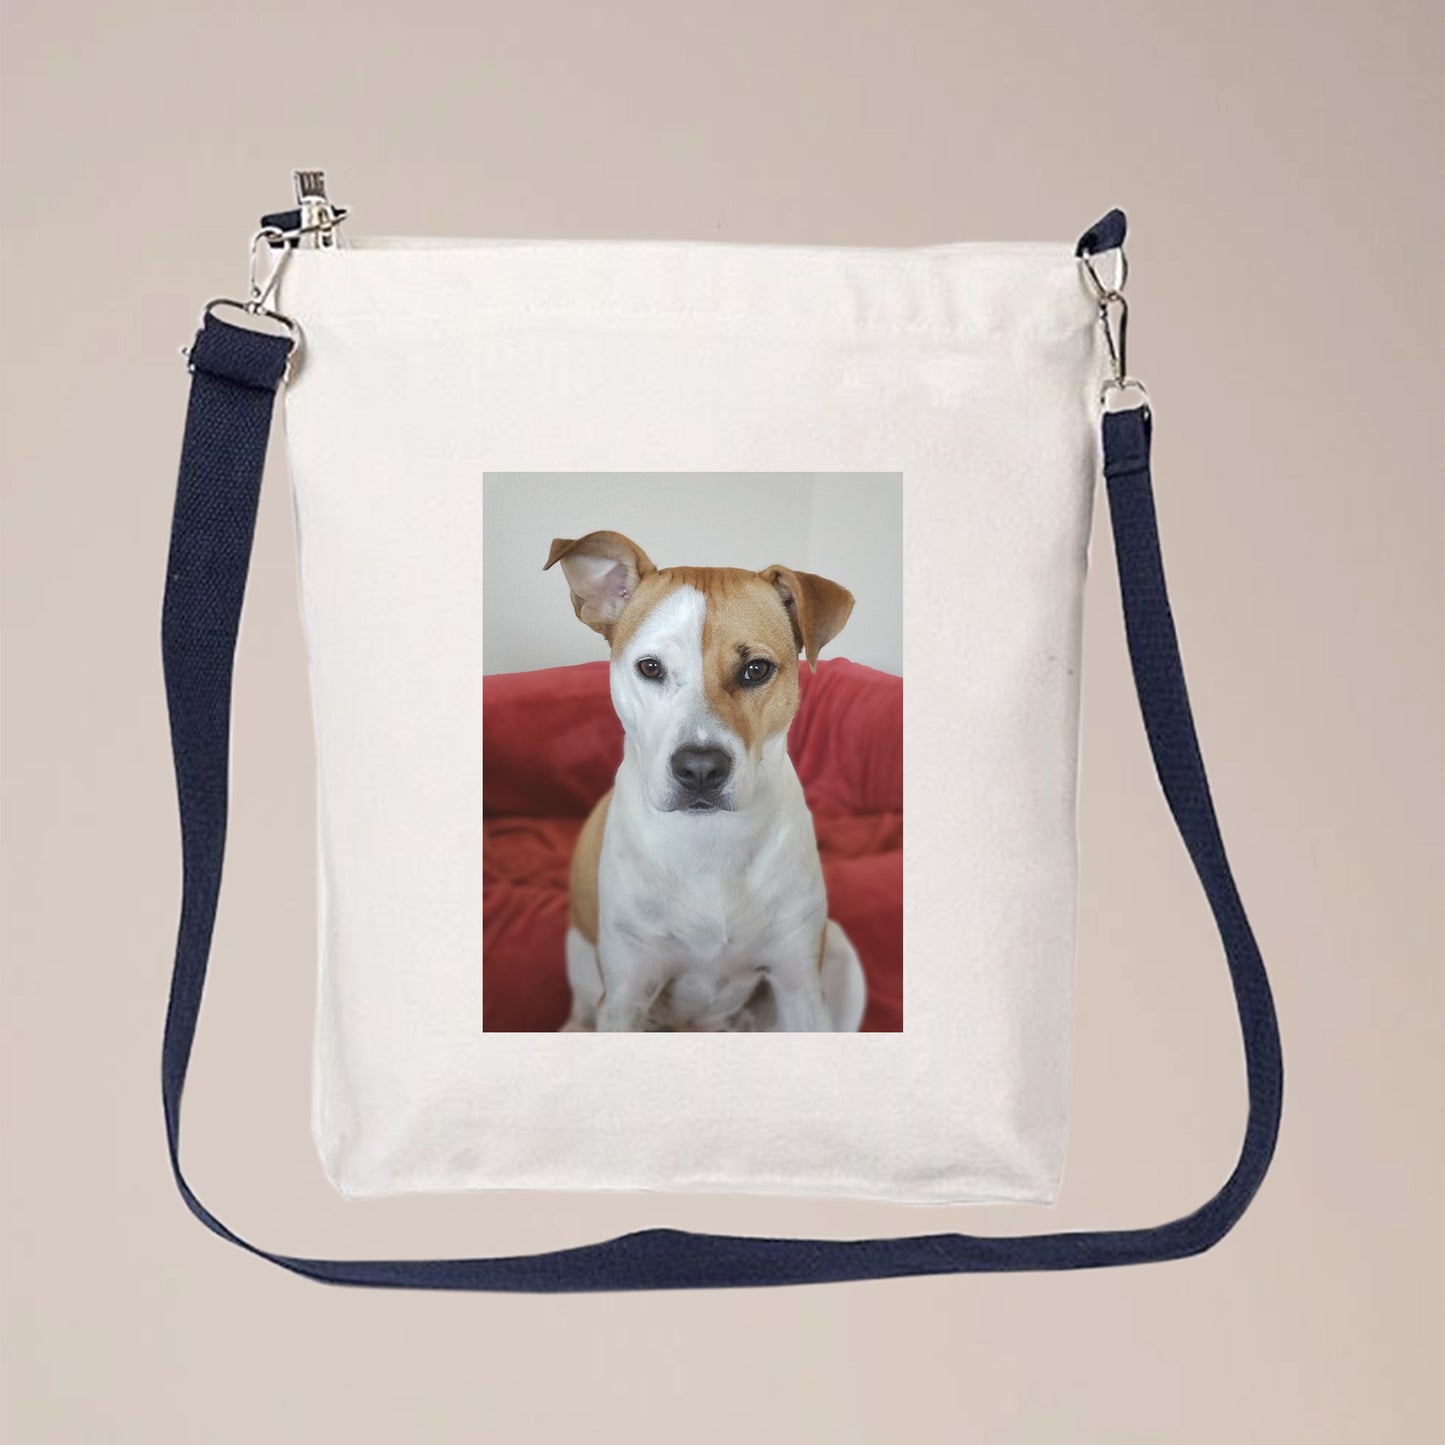 A photo of a dog is printed on a white canvas crossbody bag with a long, blue, and adjustable strap. People can personalize this crossbody bag with pet photos, initials, logos, text, etc.